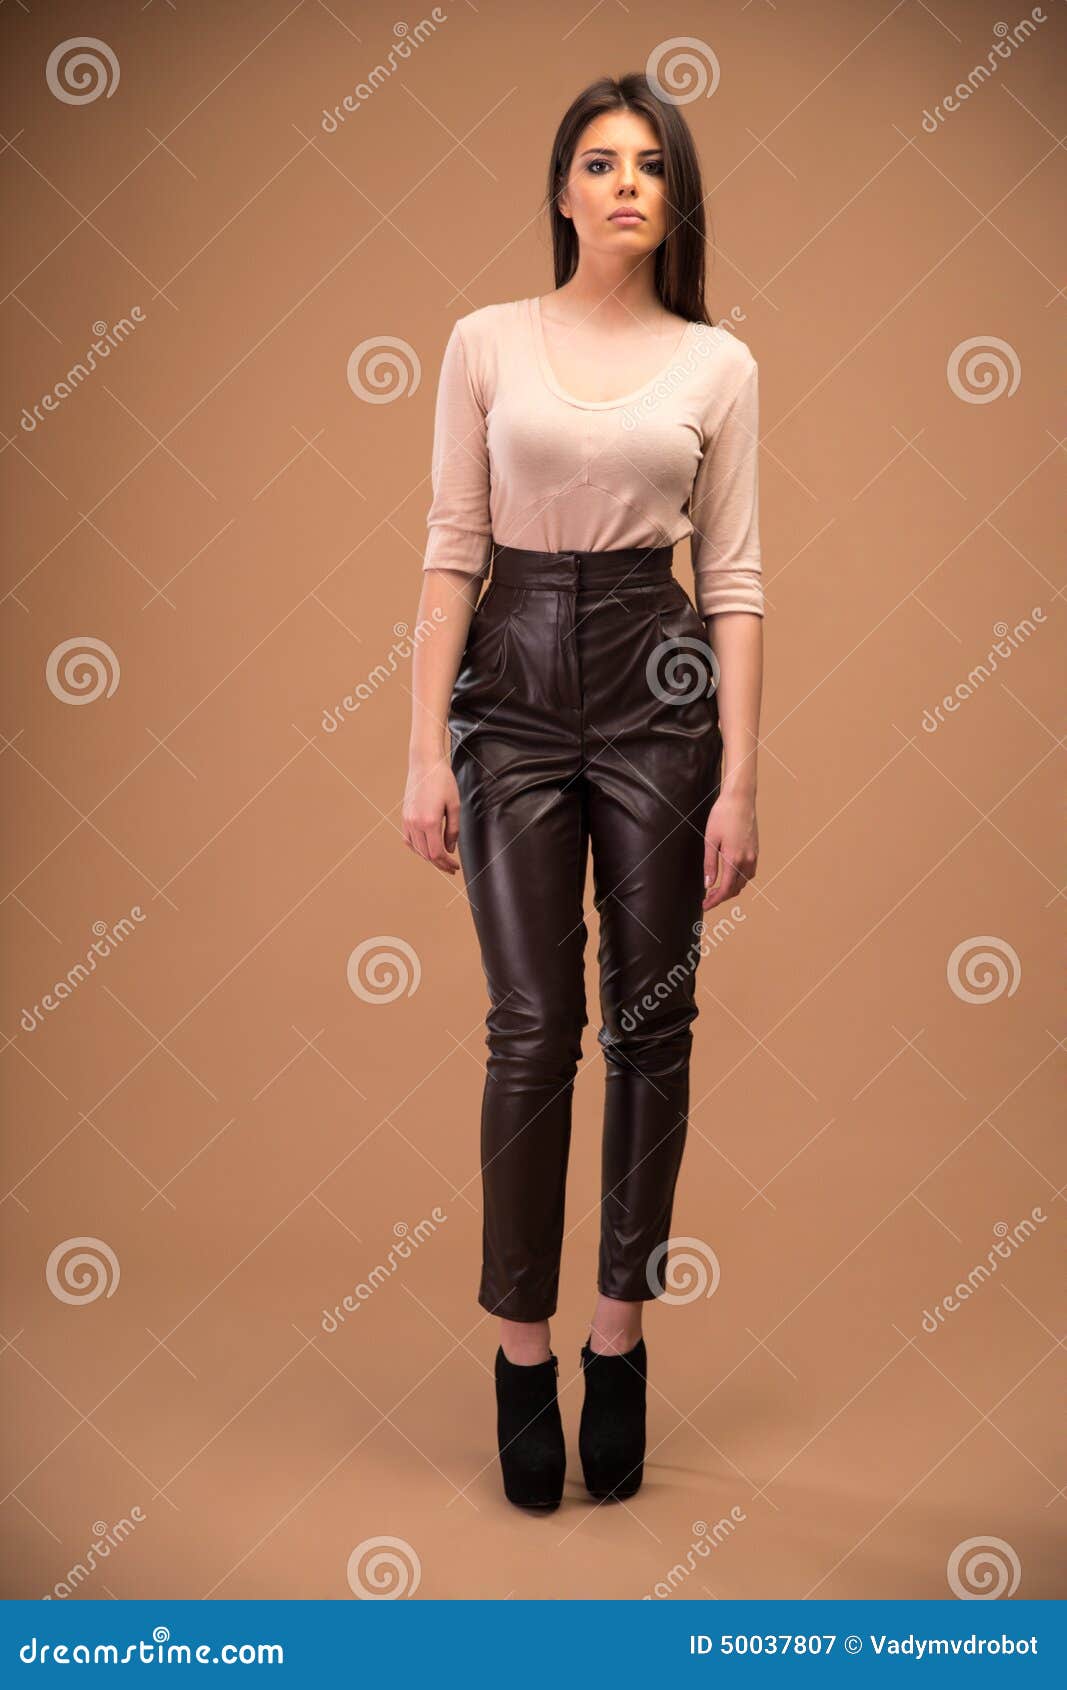 Attractive Young Woman in Fashion Cloth Stock Image - Image of adult ...